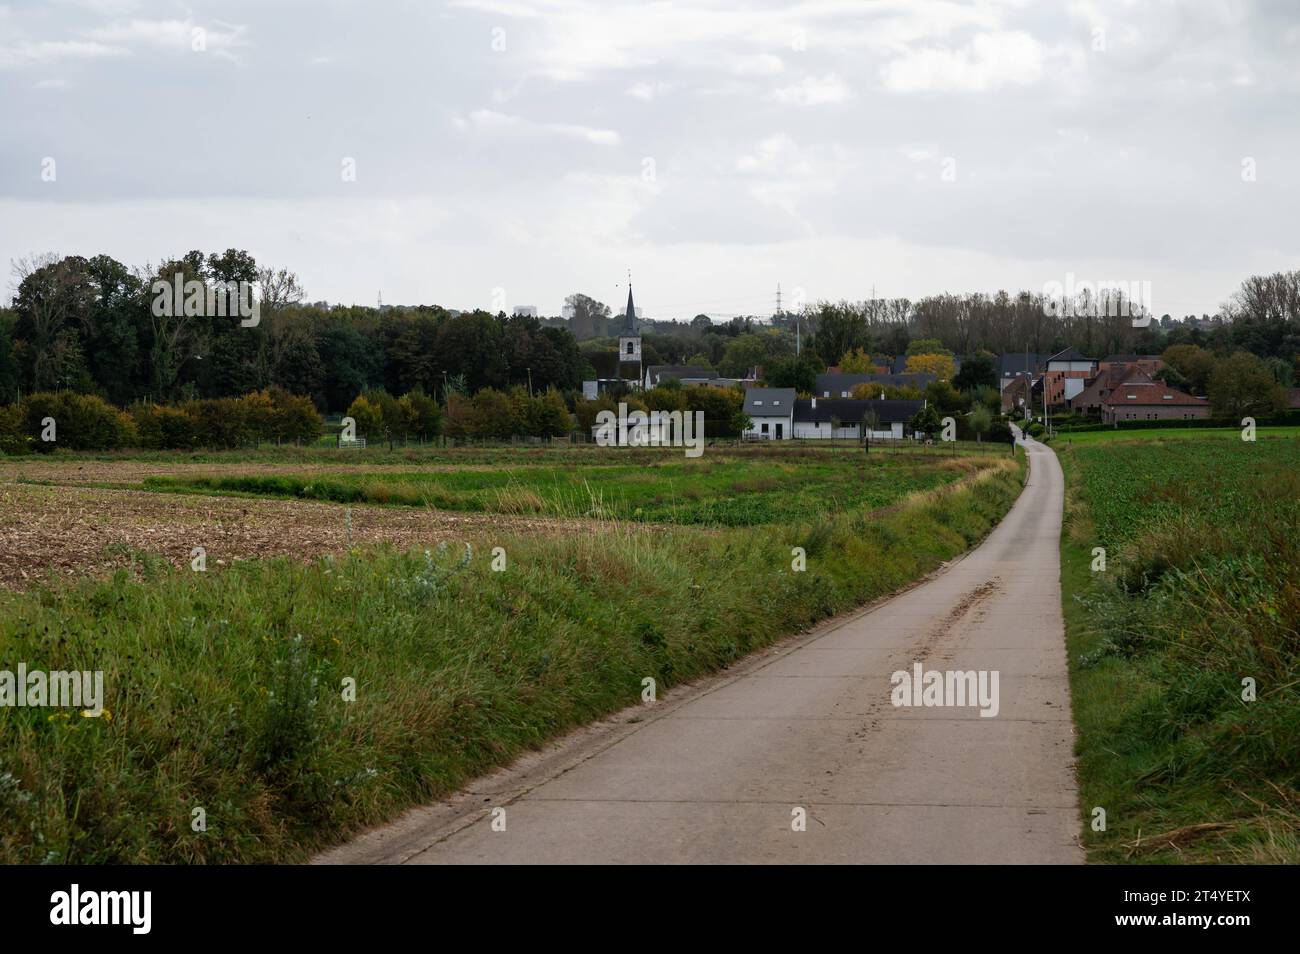 Country road through the agriculture fields at the village Ossel, Flemish Brabant, Belgium Credit: Imago/Alamy Live News Stock Photo